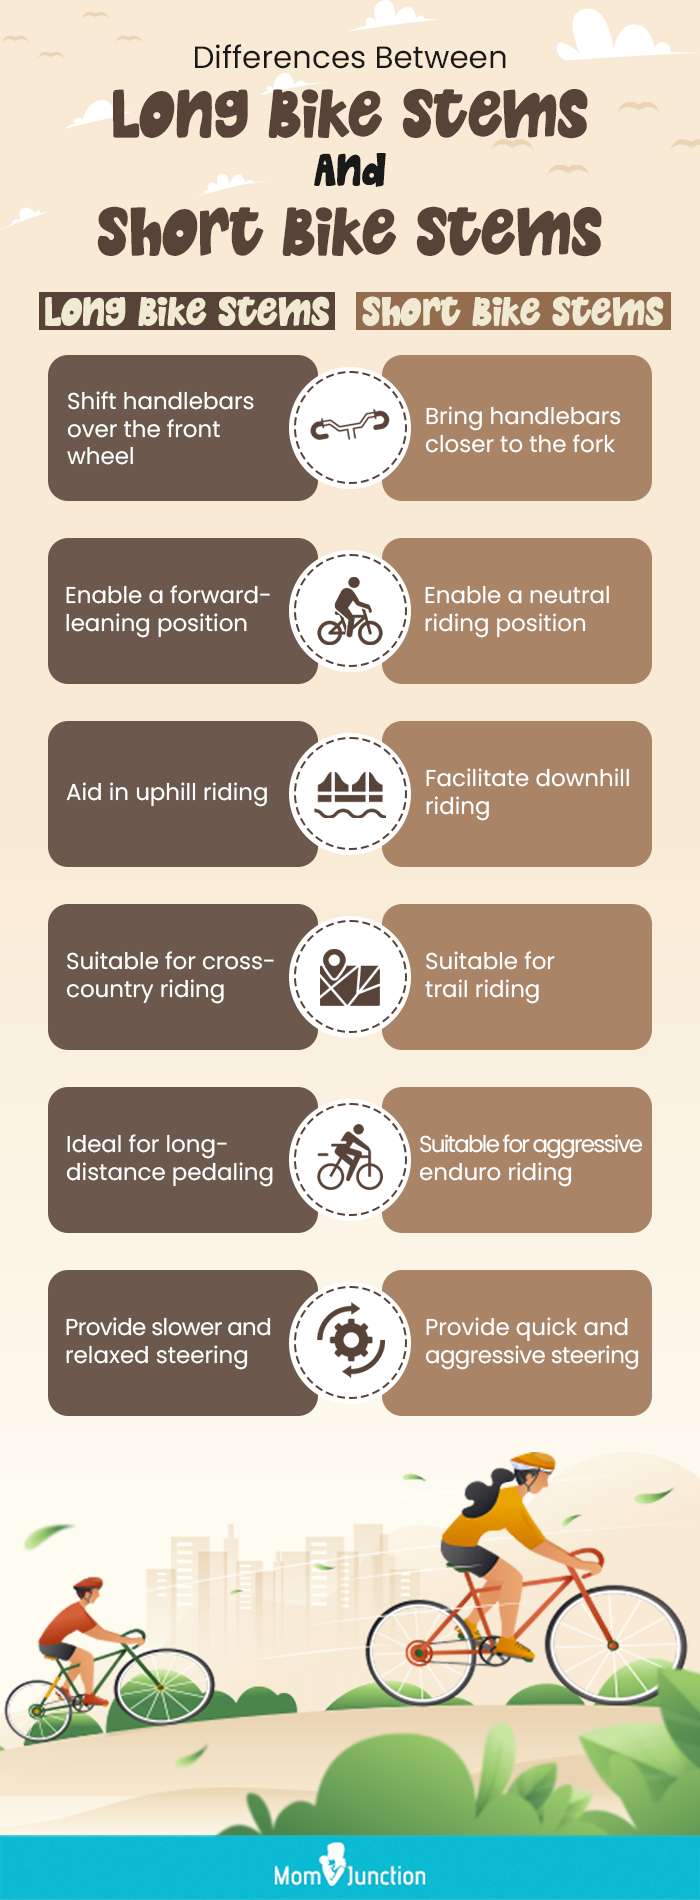 Differences Between Long Bike Stems And Short Bike Stems (infographic)